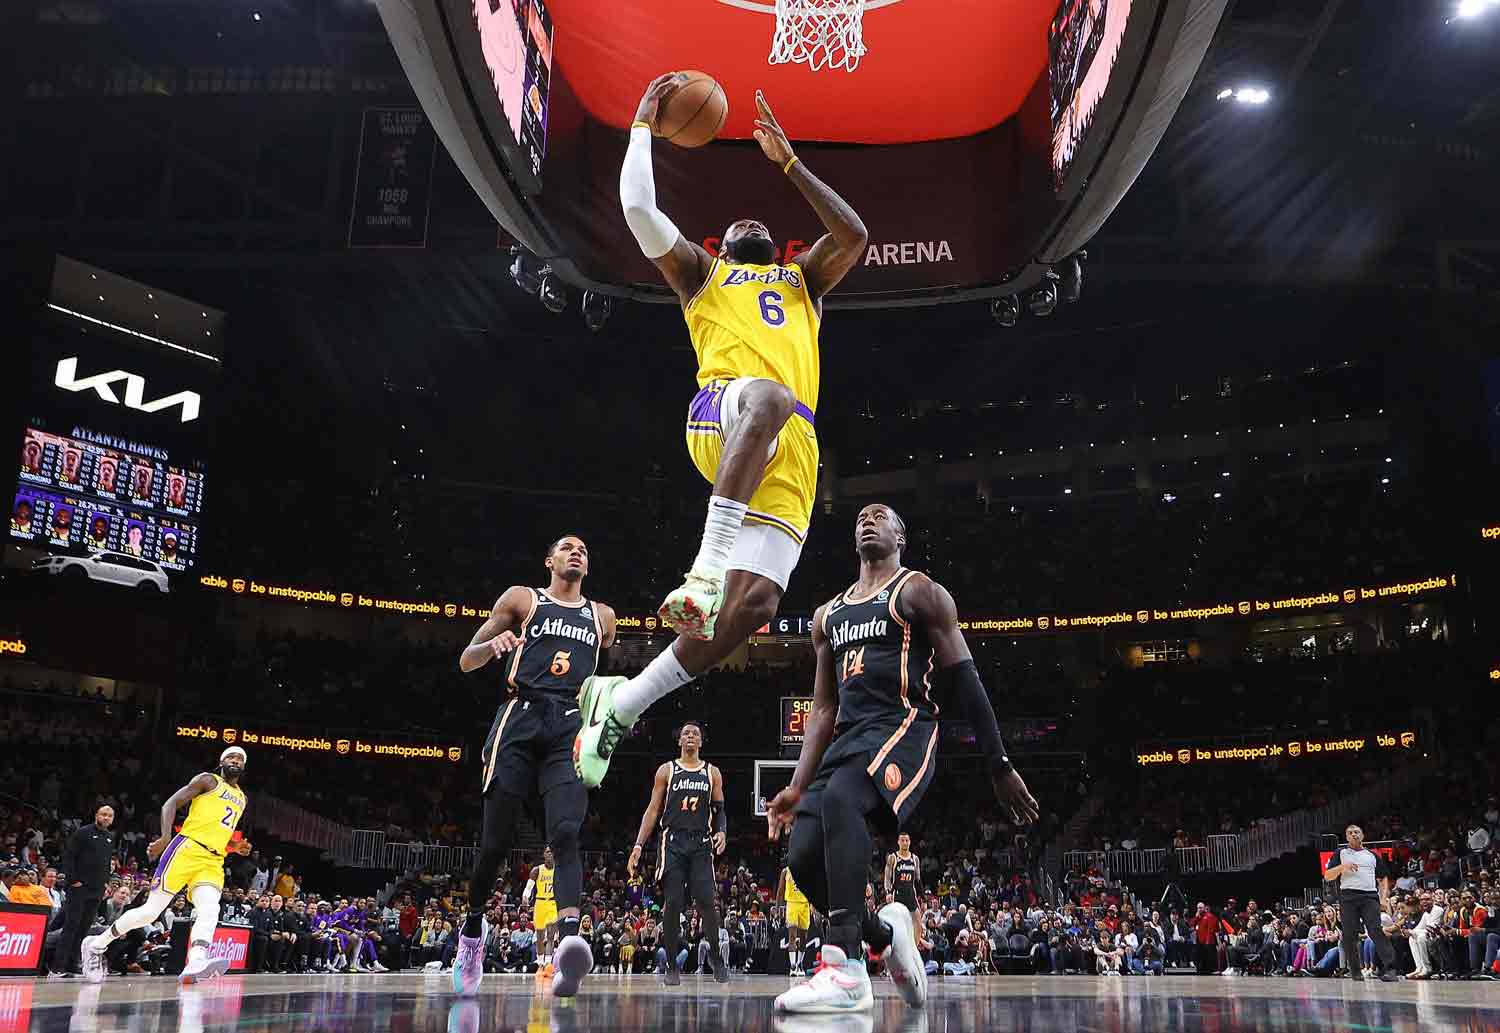 LeBron James has jumped into the air and is about to dunk a basketball as two opponents look on behind him.